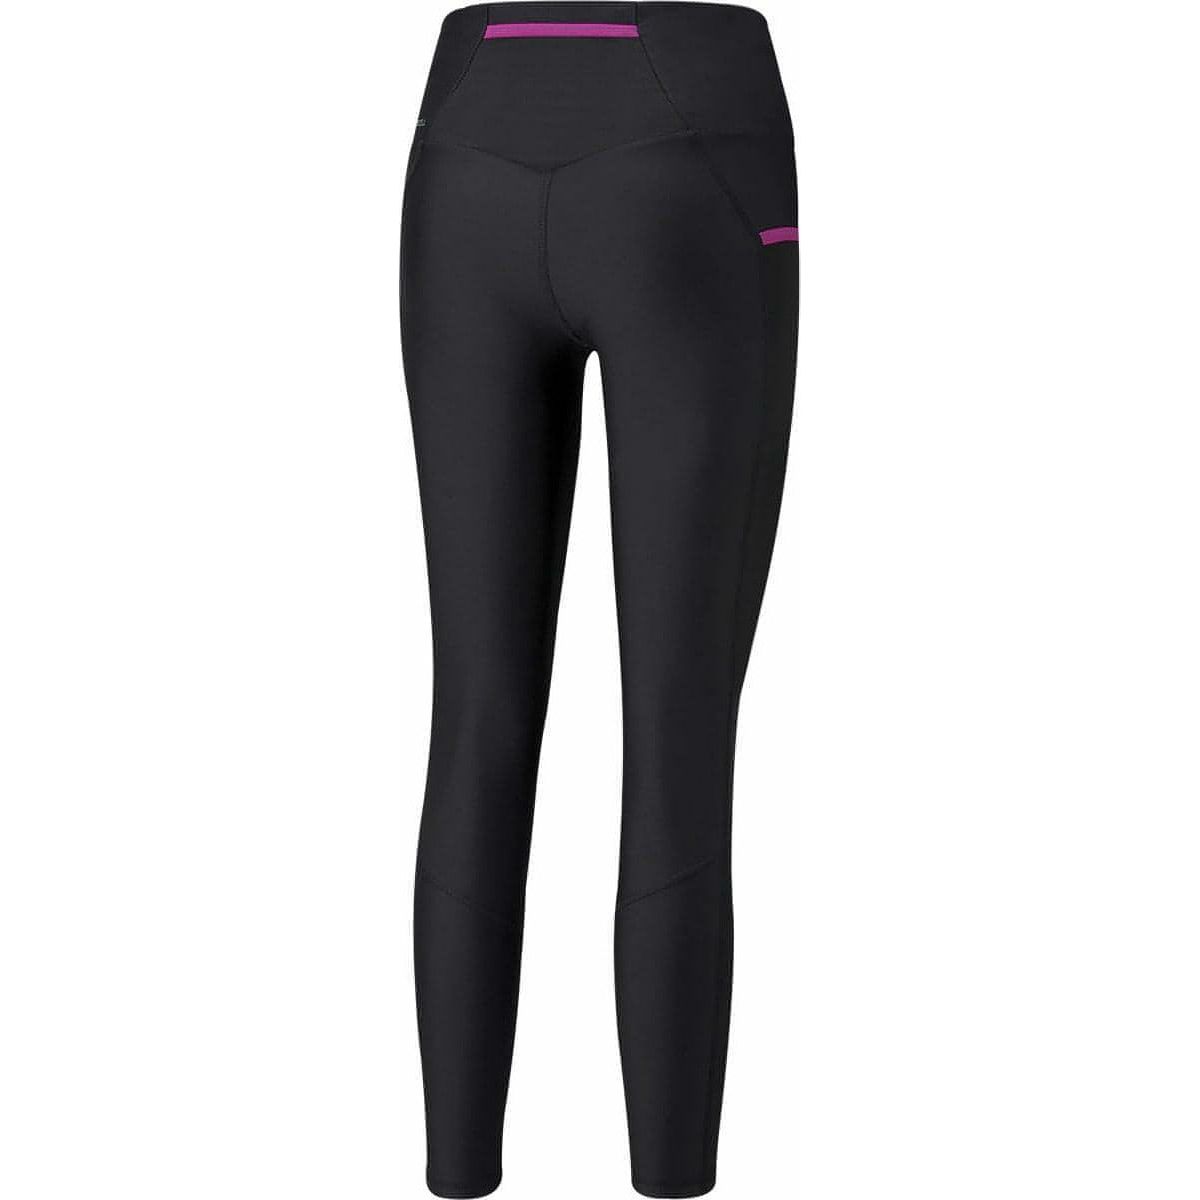 Wave Performance Legging – Lakes and Grapes